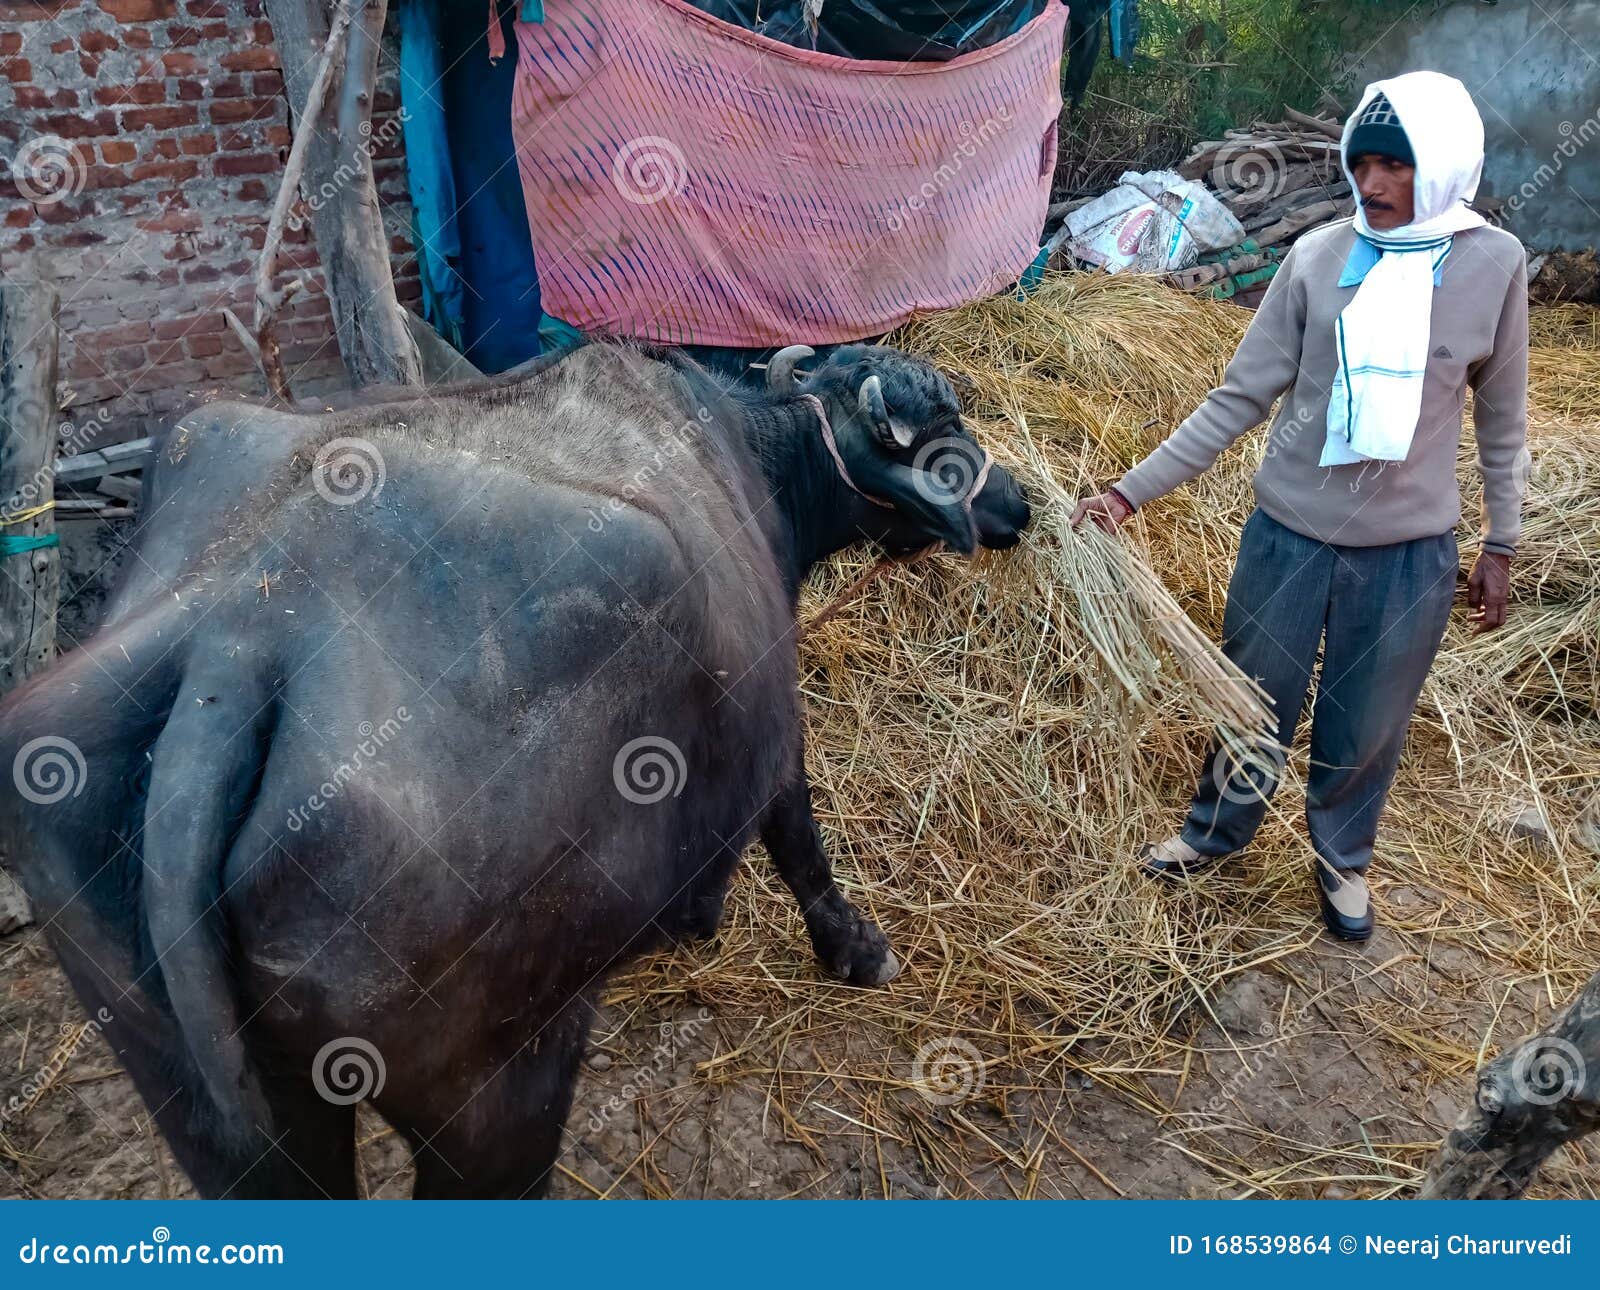 An Indian Cowherd Man Dry Grass Food for the Buffalo at Stable in India January 2020 Editorial Stock Image - Image of making, indian: 168539864